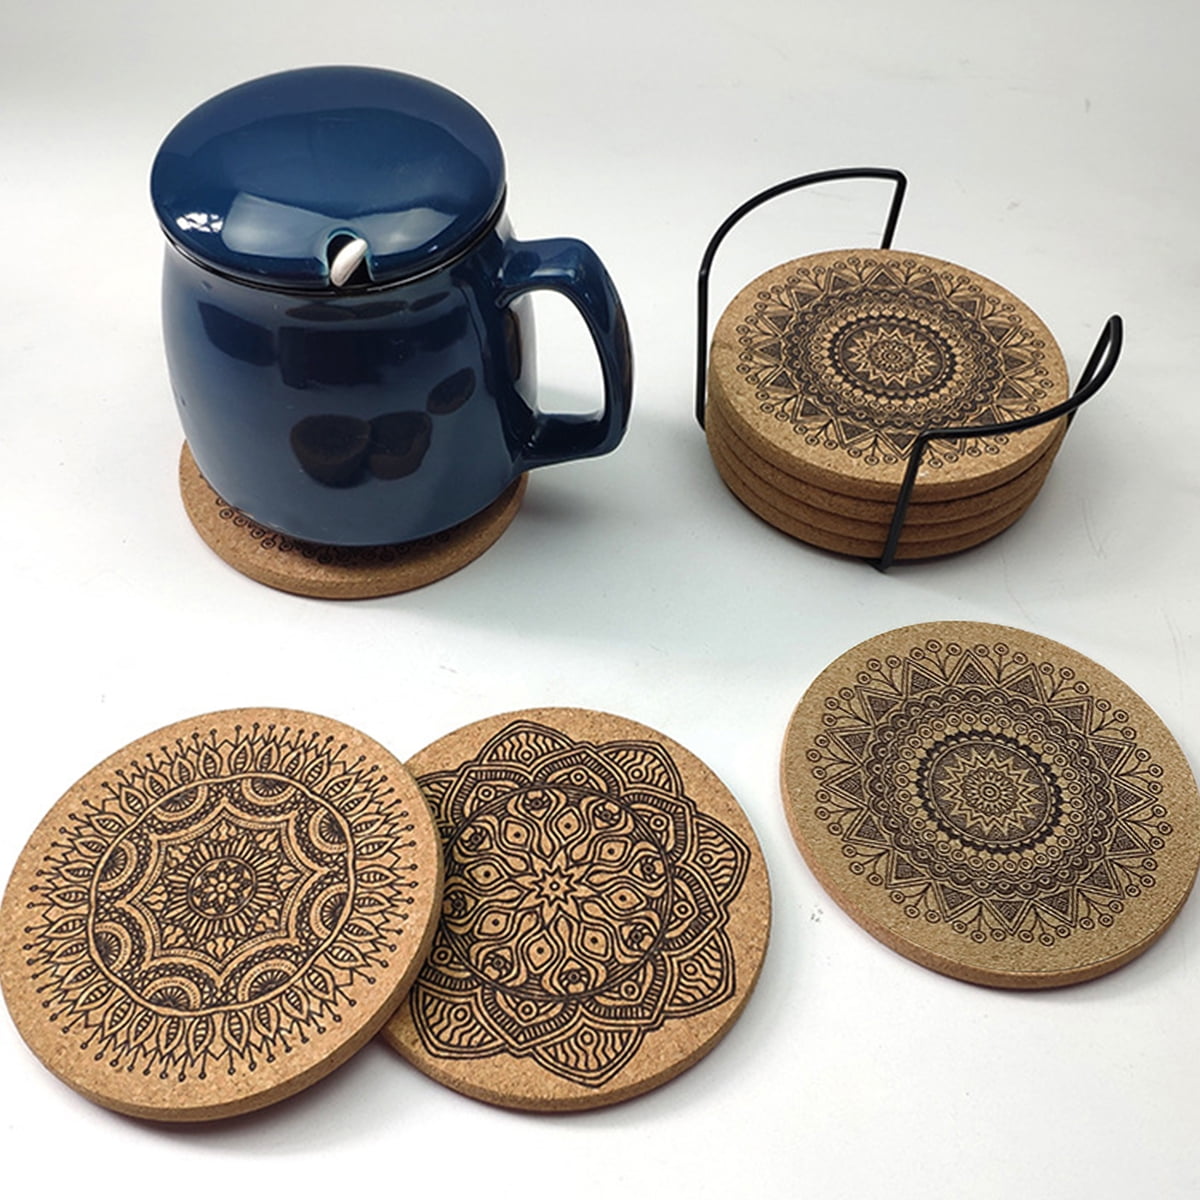 Didaey 200 Pcs Cork Coaster for Drink Absorbent Blank Coasters Bulk Tea or  Coffee Coaster Set 4 Inch Wooden Thick Cork Coasters for Wine Glass Cup Mug